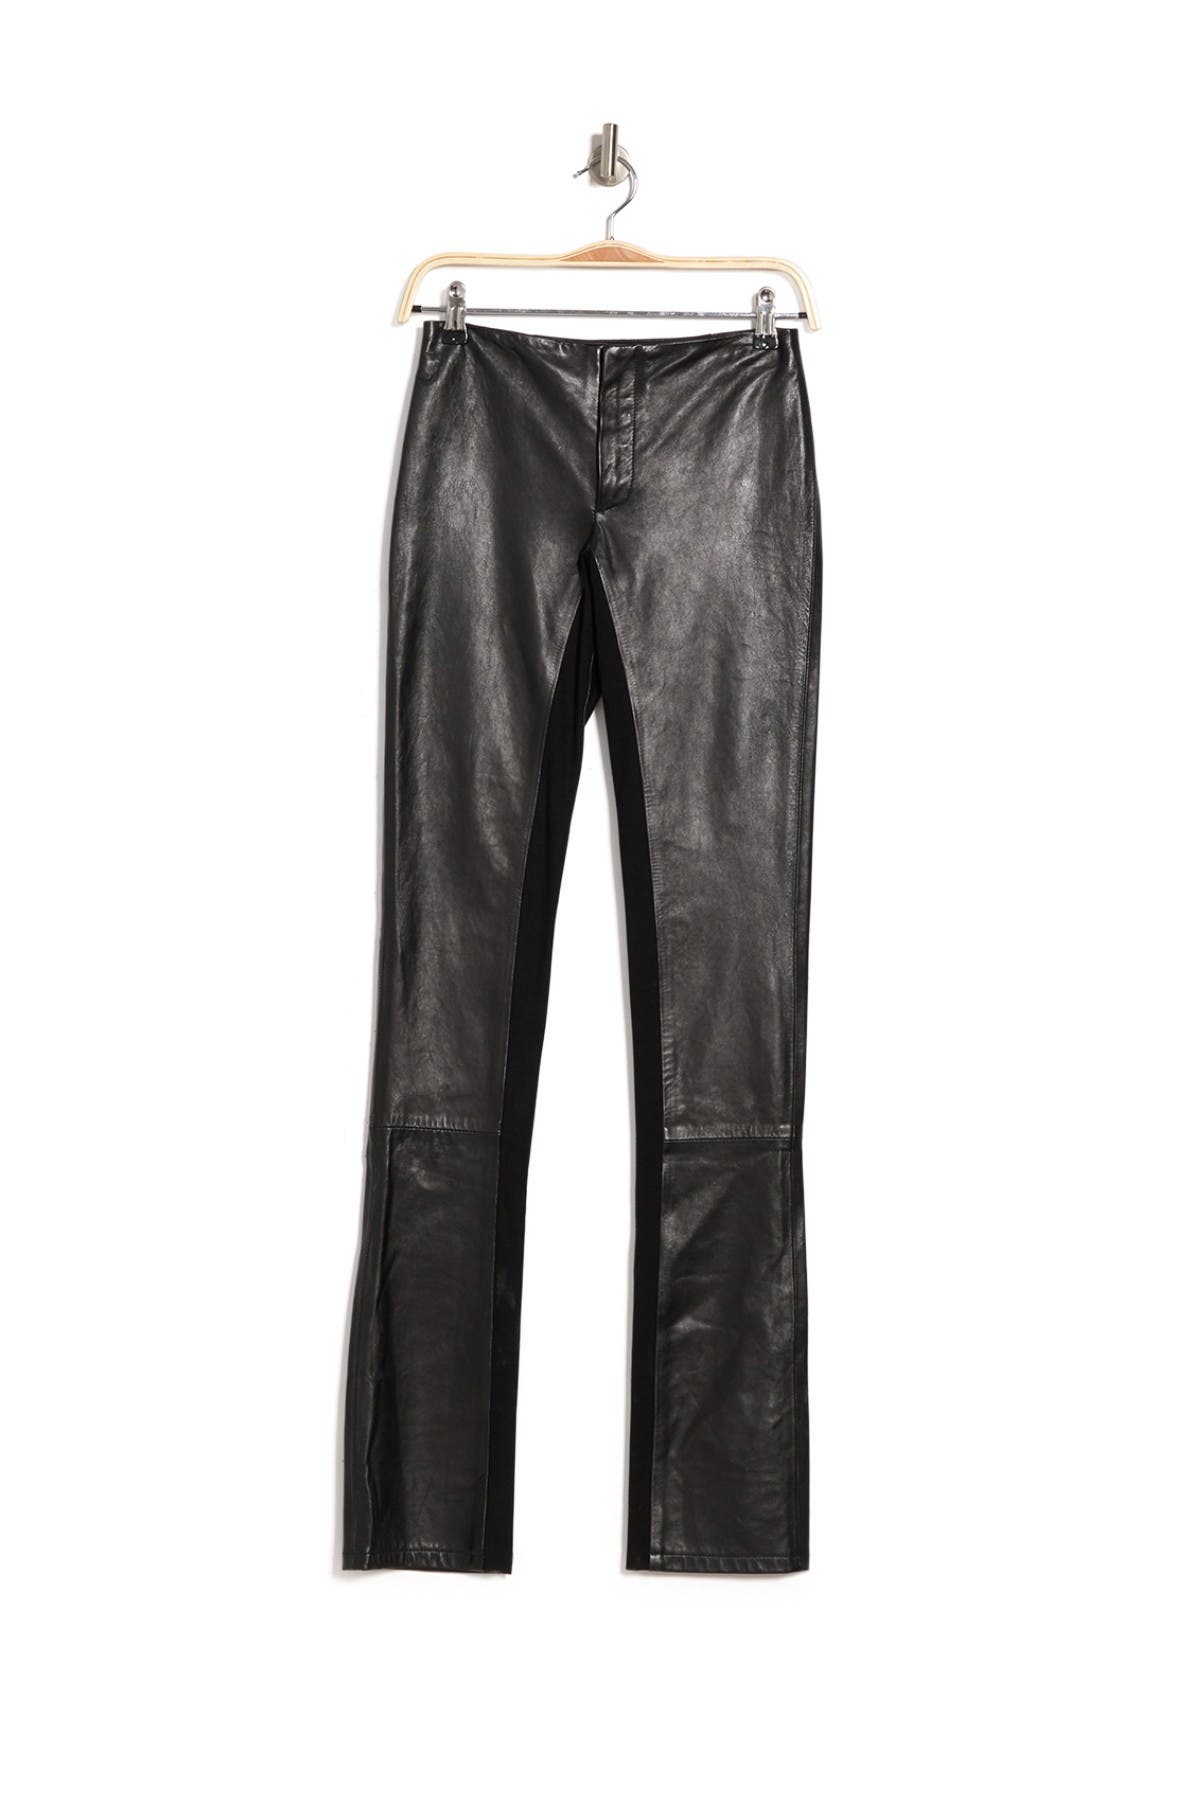 Red Valentino Leather Pants In Nero 0no